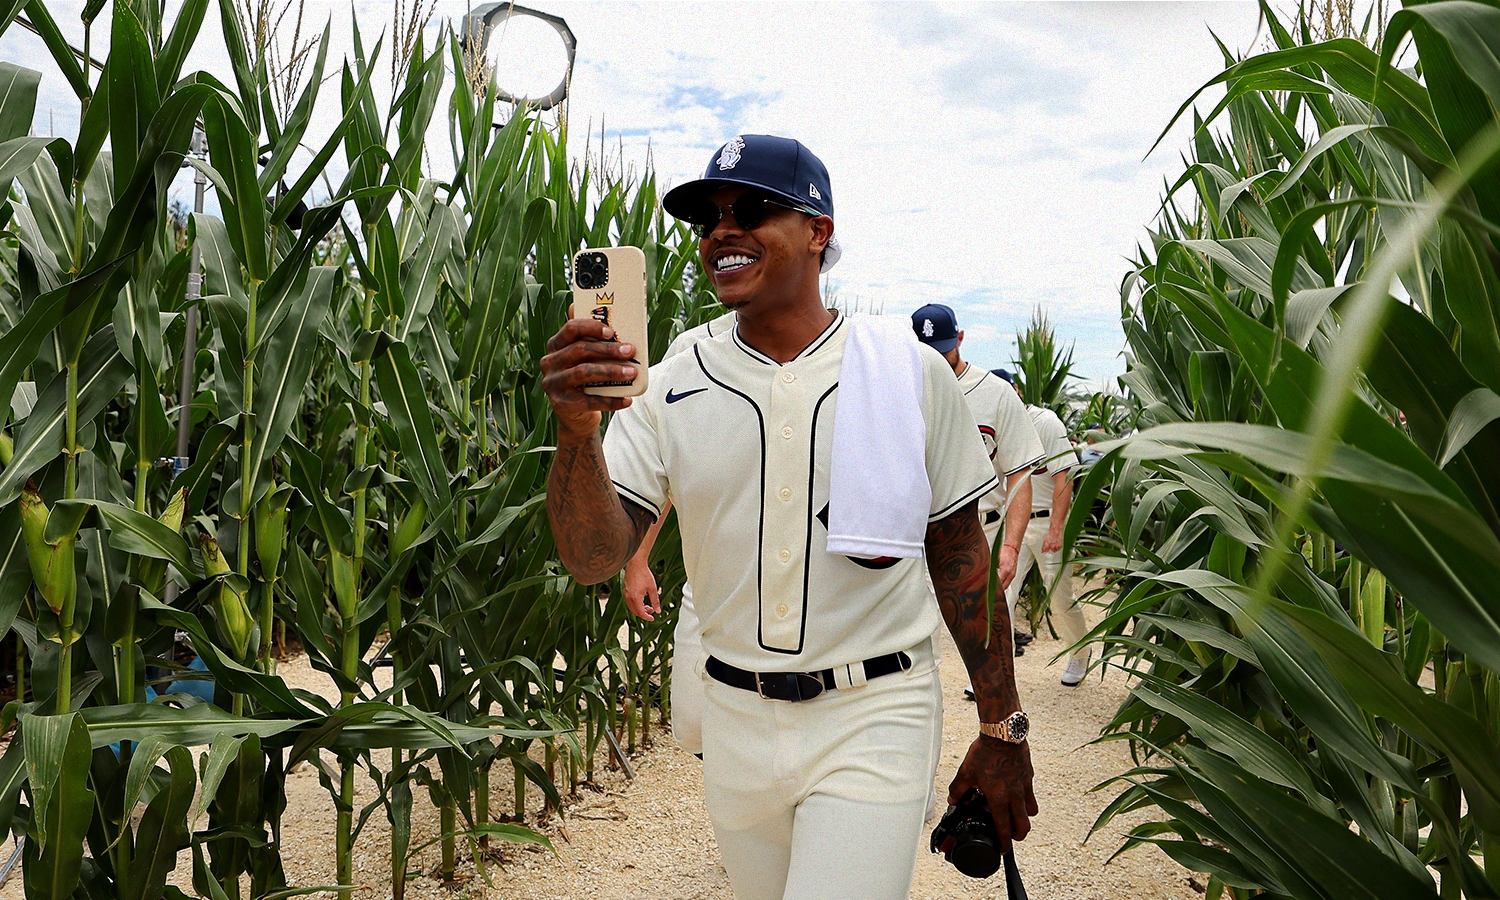 Tim Anderson Gives 'Field of Dreams' Game a Hollywood Ending - The New York  Times